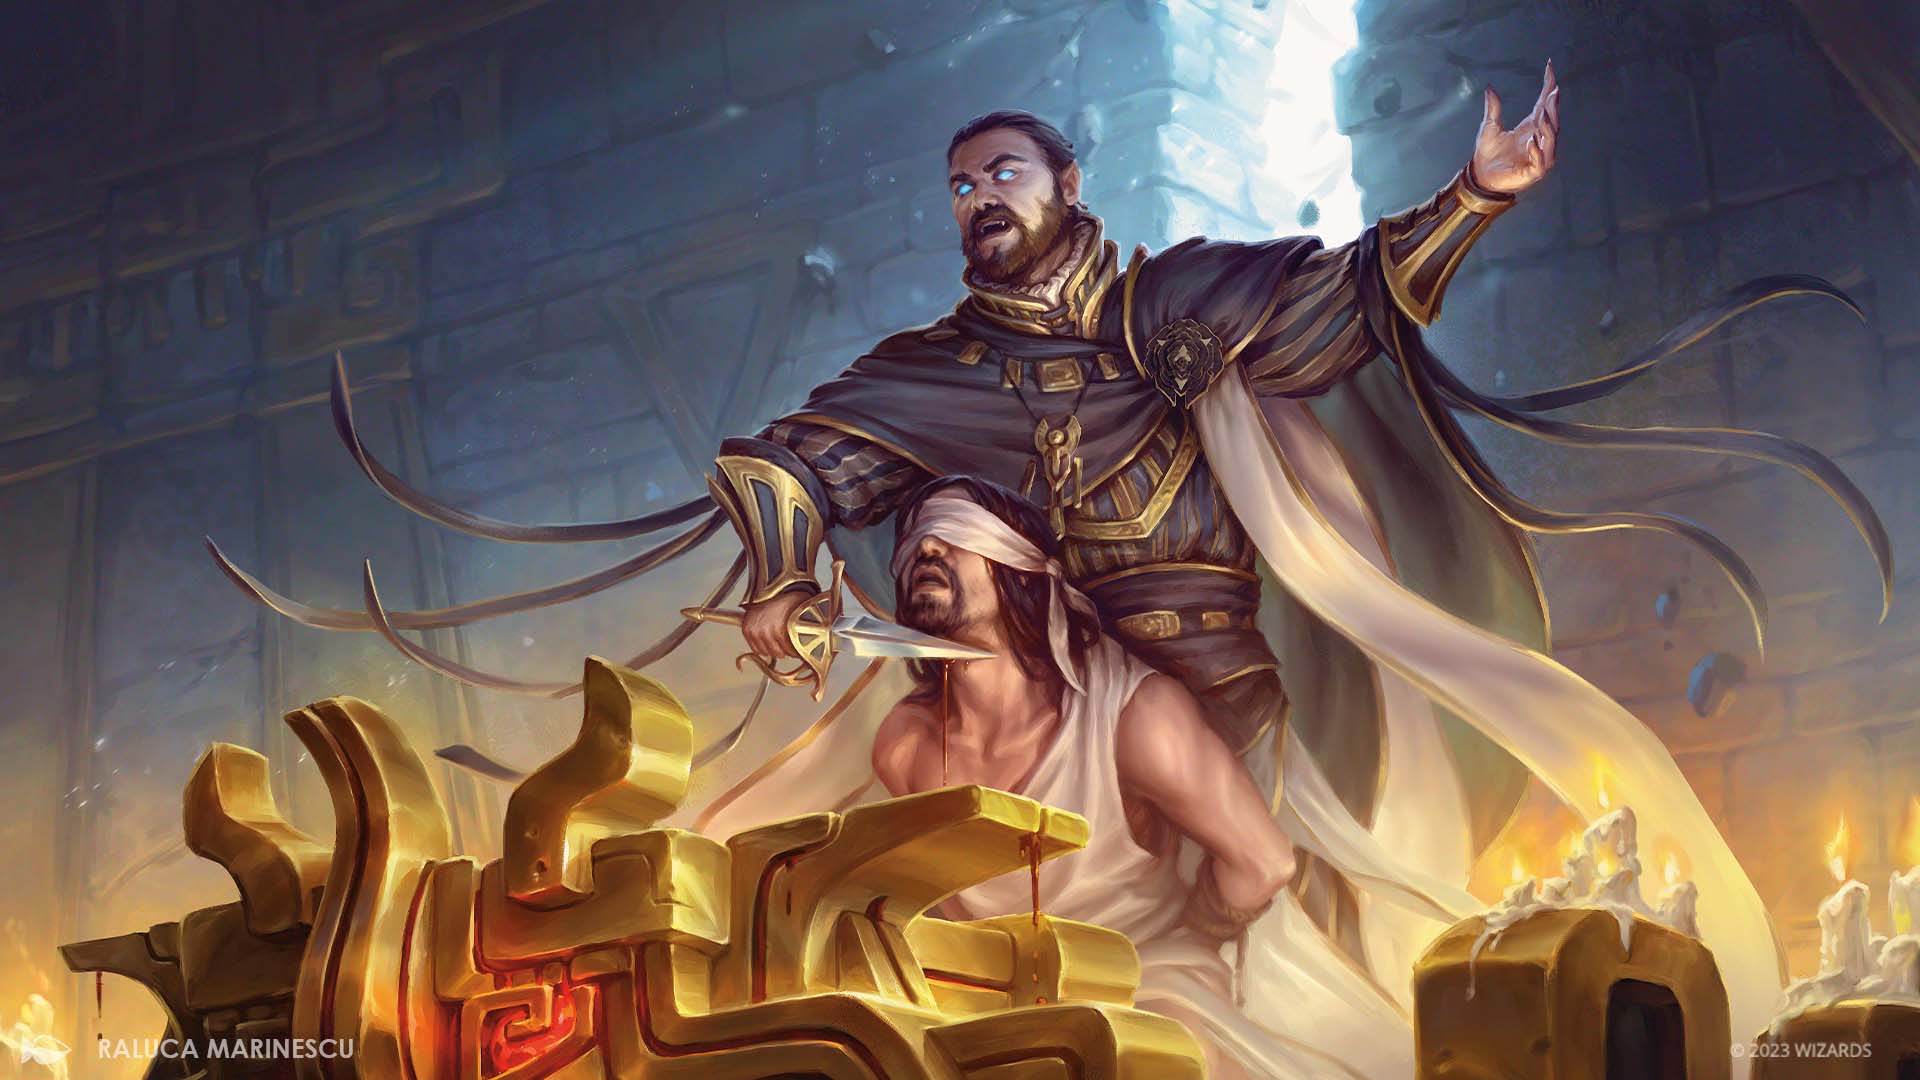 Fanatical Offering card art featuring Vito sacrificing a porter to open the temple door